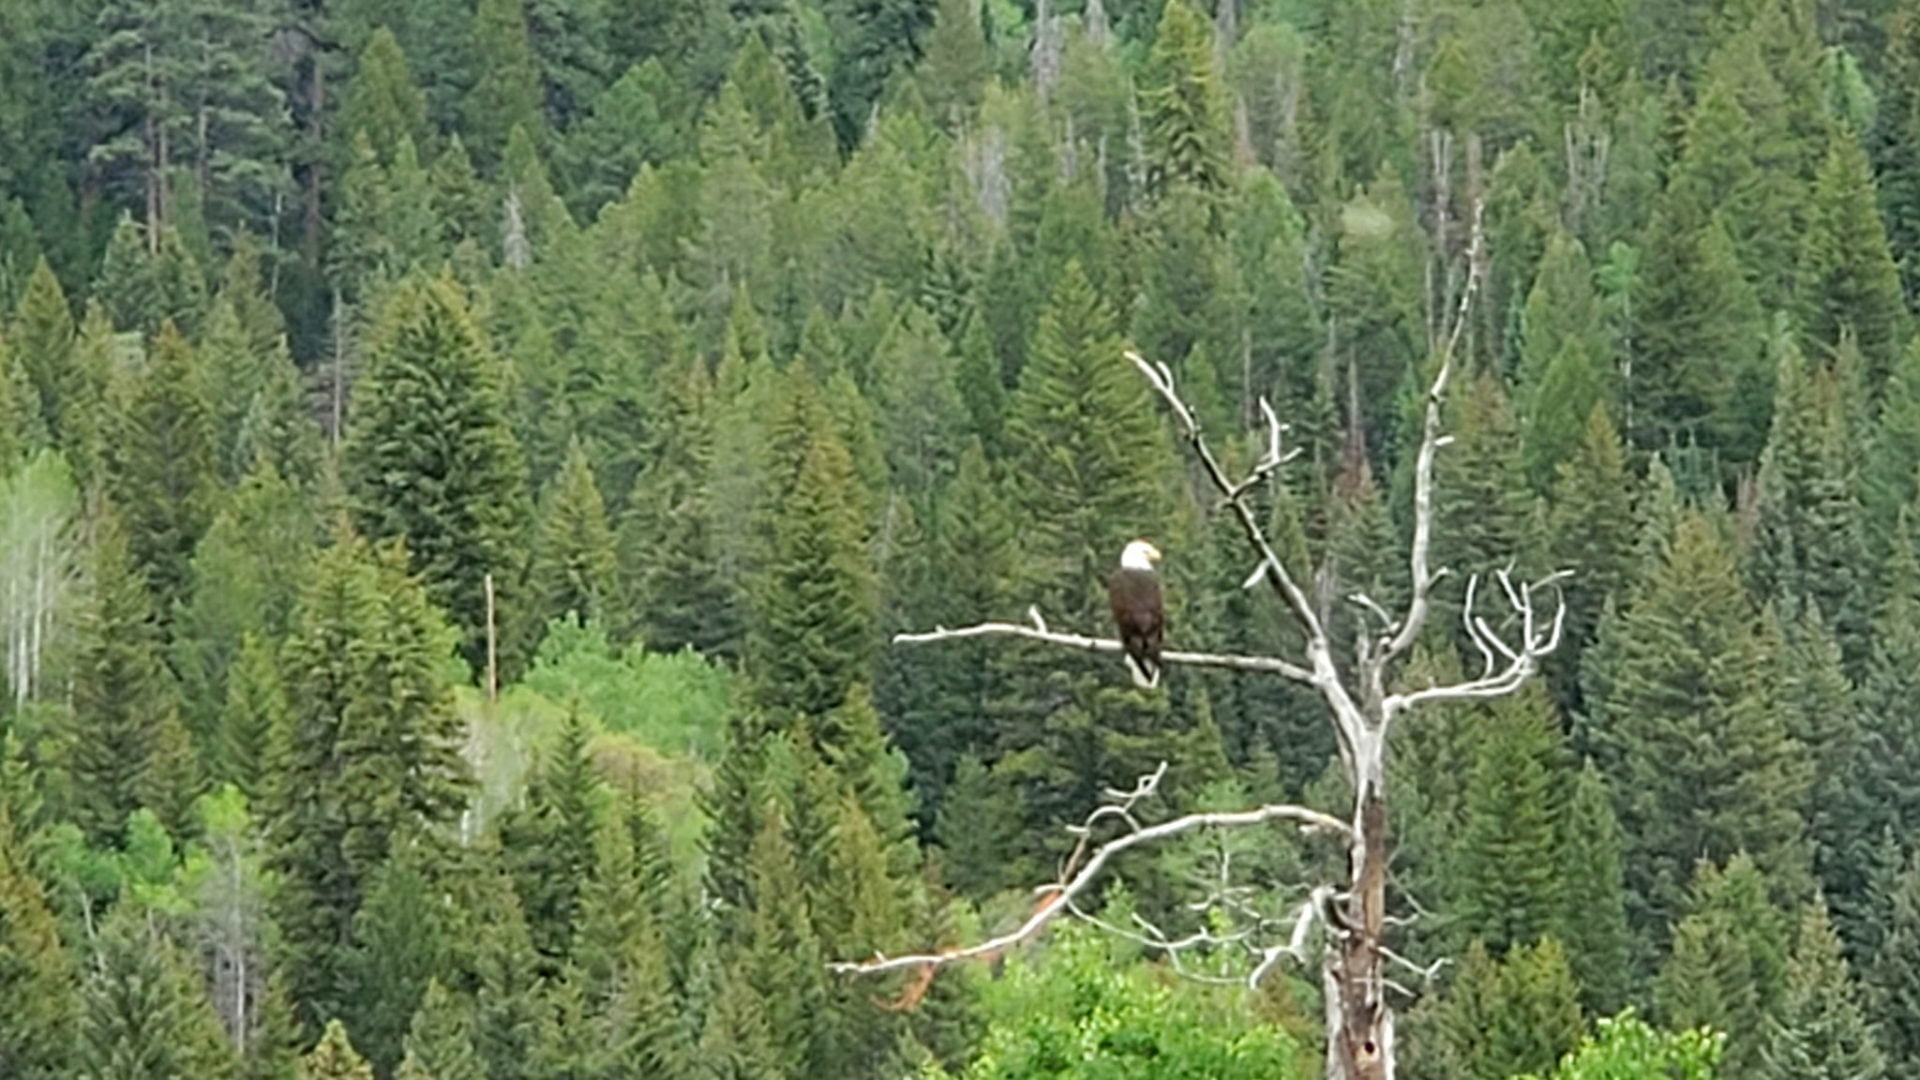 Bald Eagle on the western end of the route